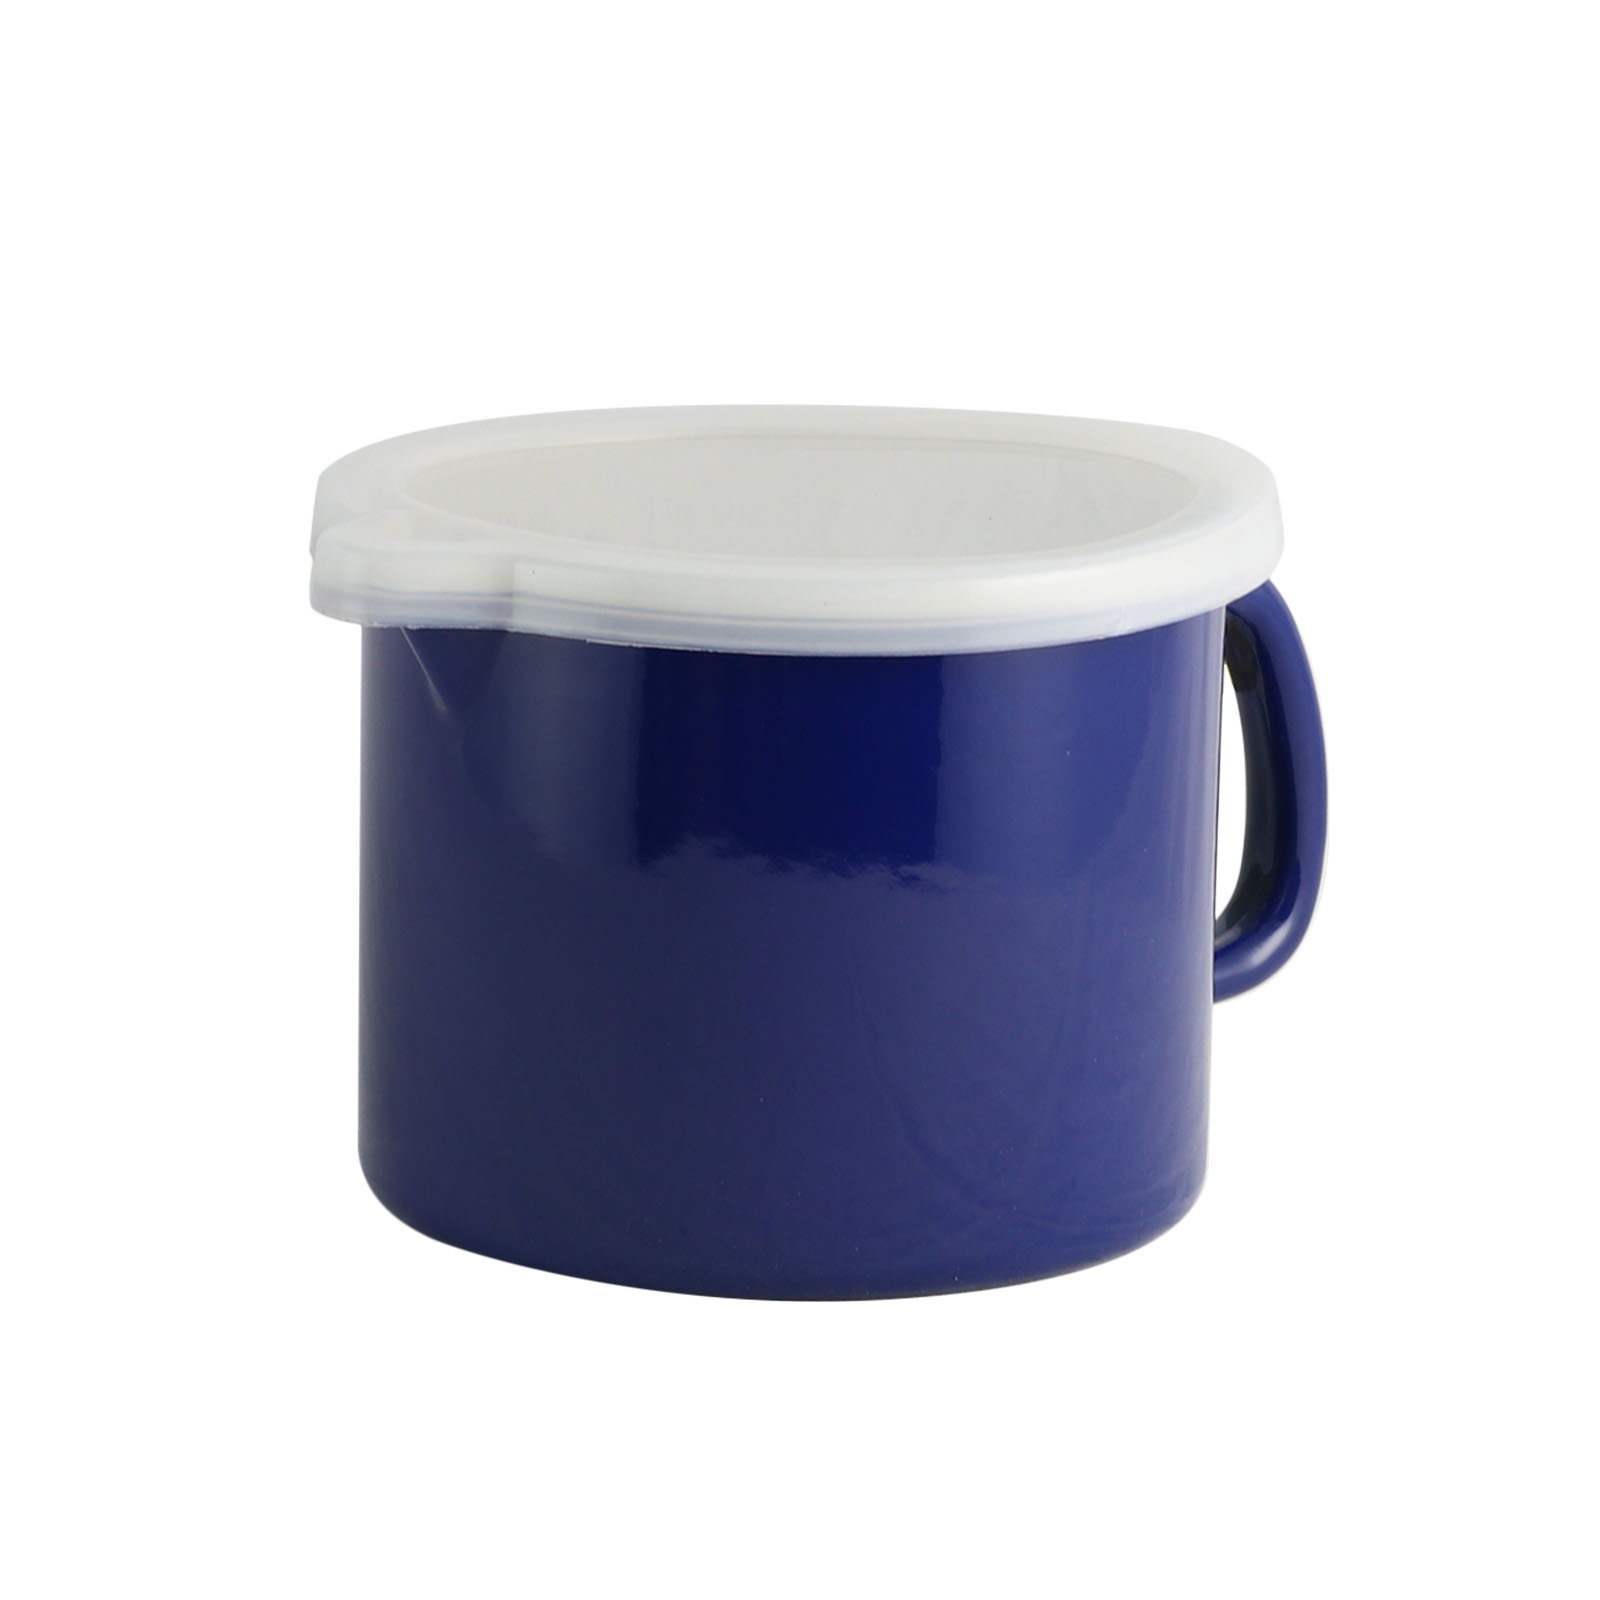 Weight Watchers Nessa Measuring Cup in Blue